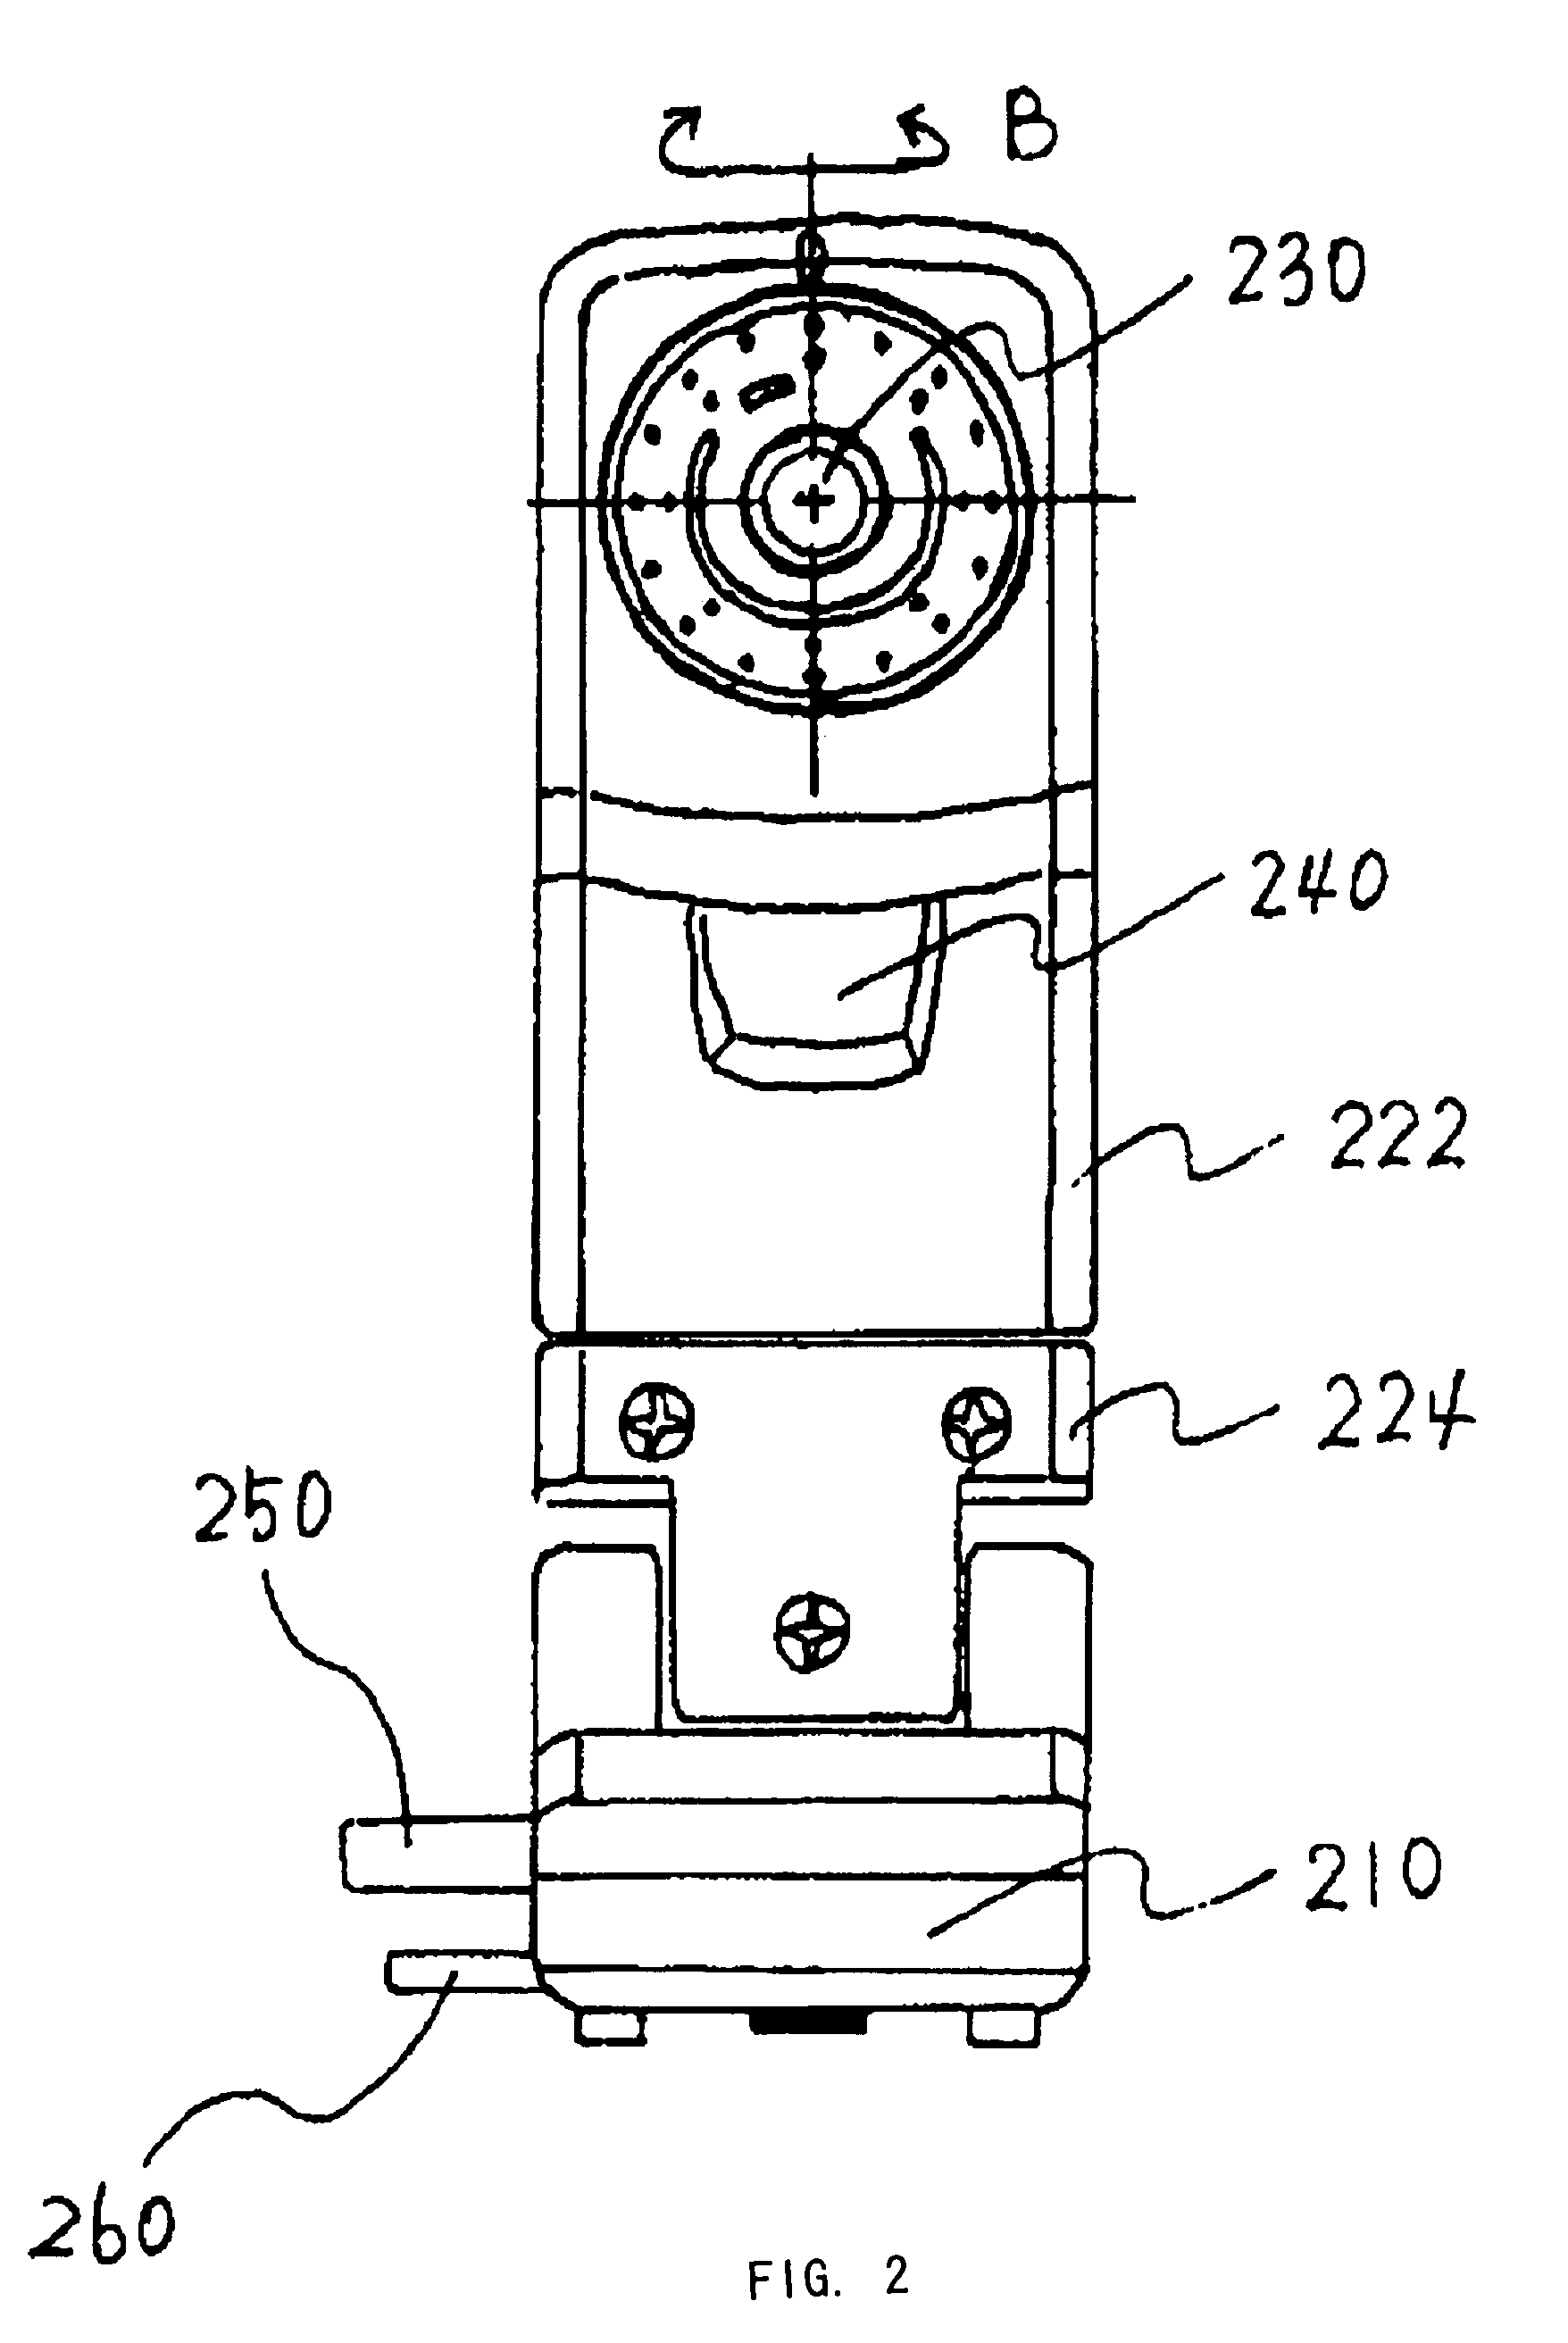 Image pickup device attachable to electronic apparatus